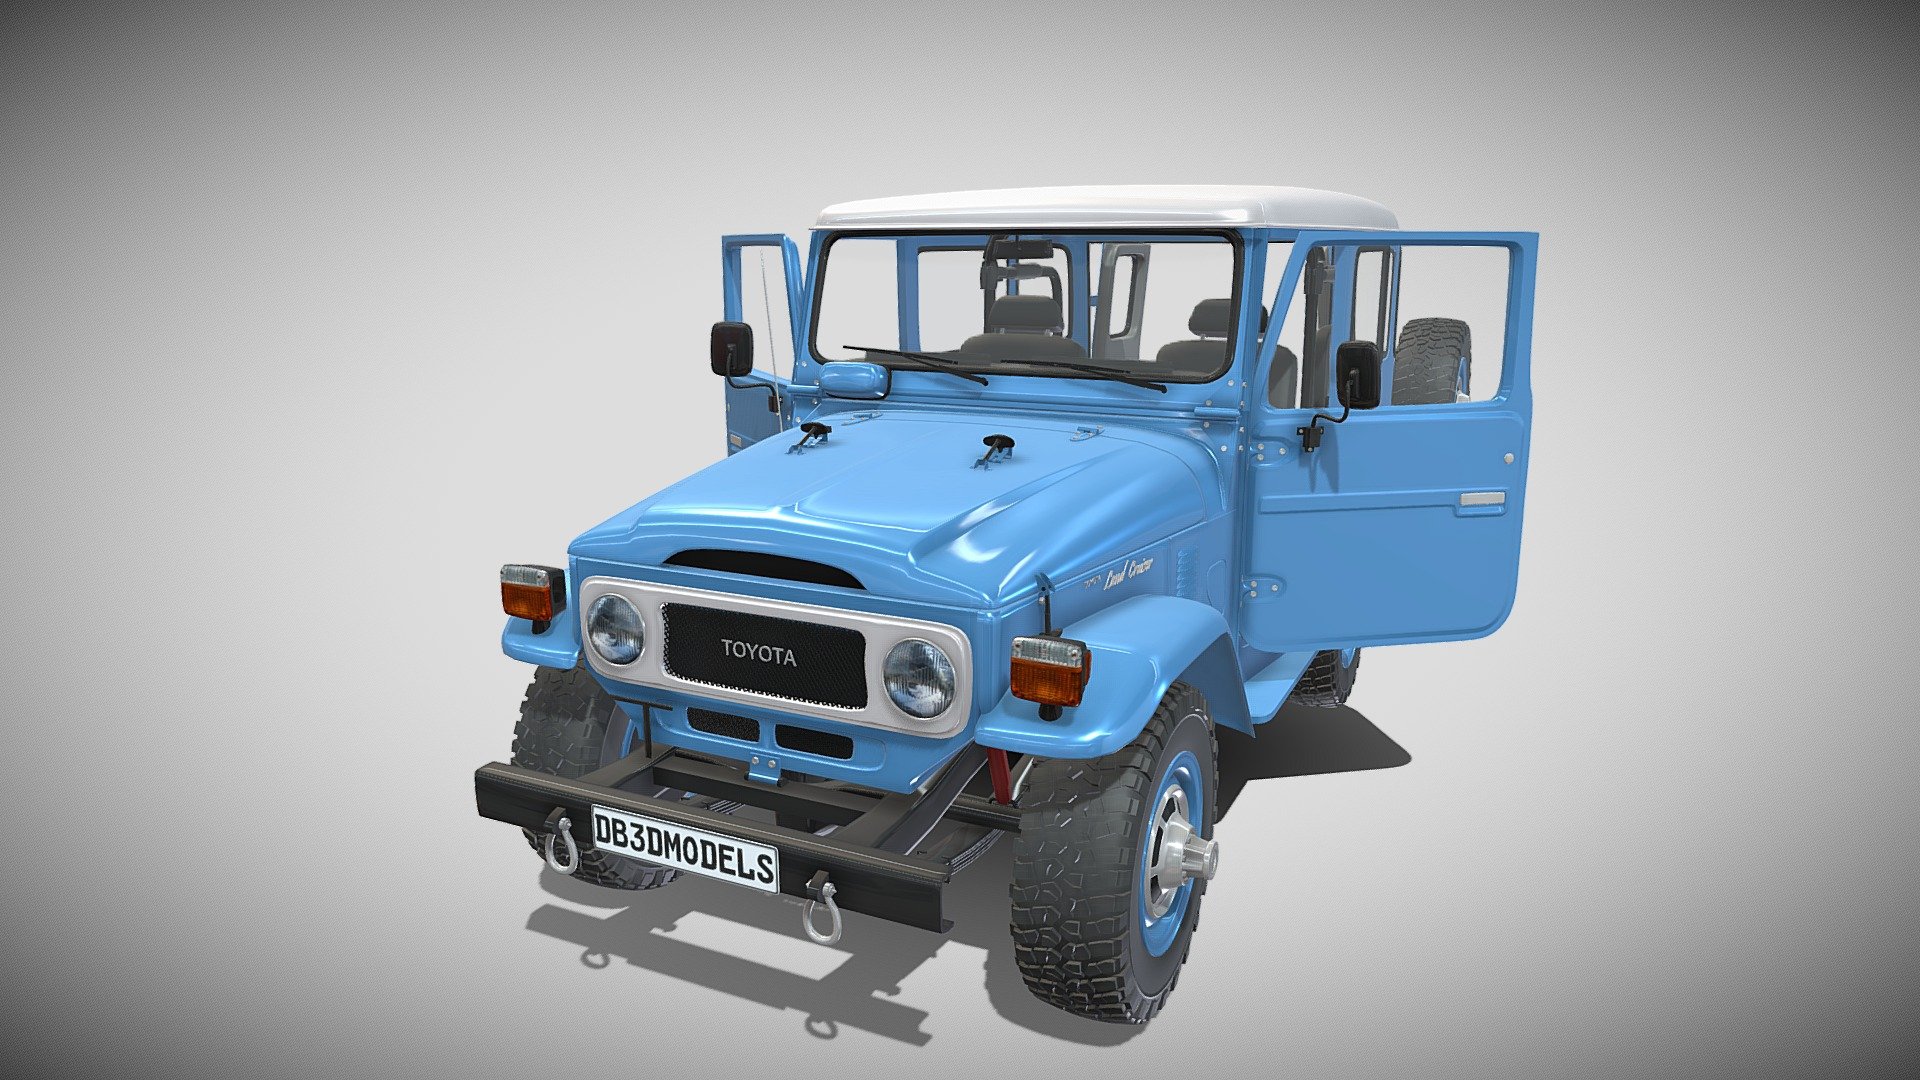 A very accurate model of the Toyota Land Cruiser FJ-40, with a highly detailed interior.

File formats:
-.blend, rendered with cycles, as seen in the images;
-.blend, rendered with cycles, with doors open, as seen in images;
-.obj, with materials applied and textures;
-.obj, with materials applied and textures and doors open;
-.dae, with materials applied and textures;
-.dae, with materials applied and textures and doors open;
-.fbx, with material slots applied;
-.fbx, with material slots applied and doors open;
-.stl;
-.stl with doors open;

3D Software:
This 3d model was originally created in Blender 2.79 and rendered with Cycles.

Materials and textures:
The model has materials applied in all formats, and is ready to import and render.
The model comes with multiple png image textures 3d model